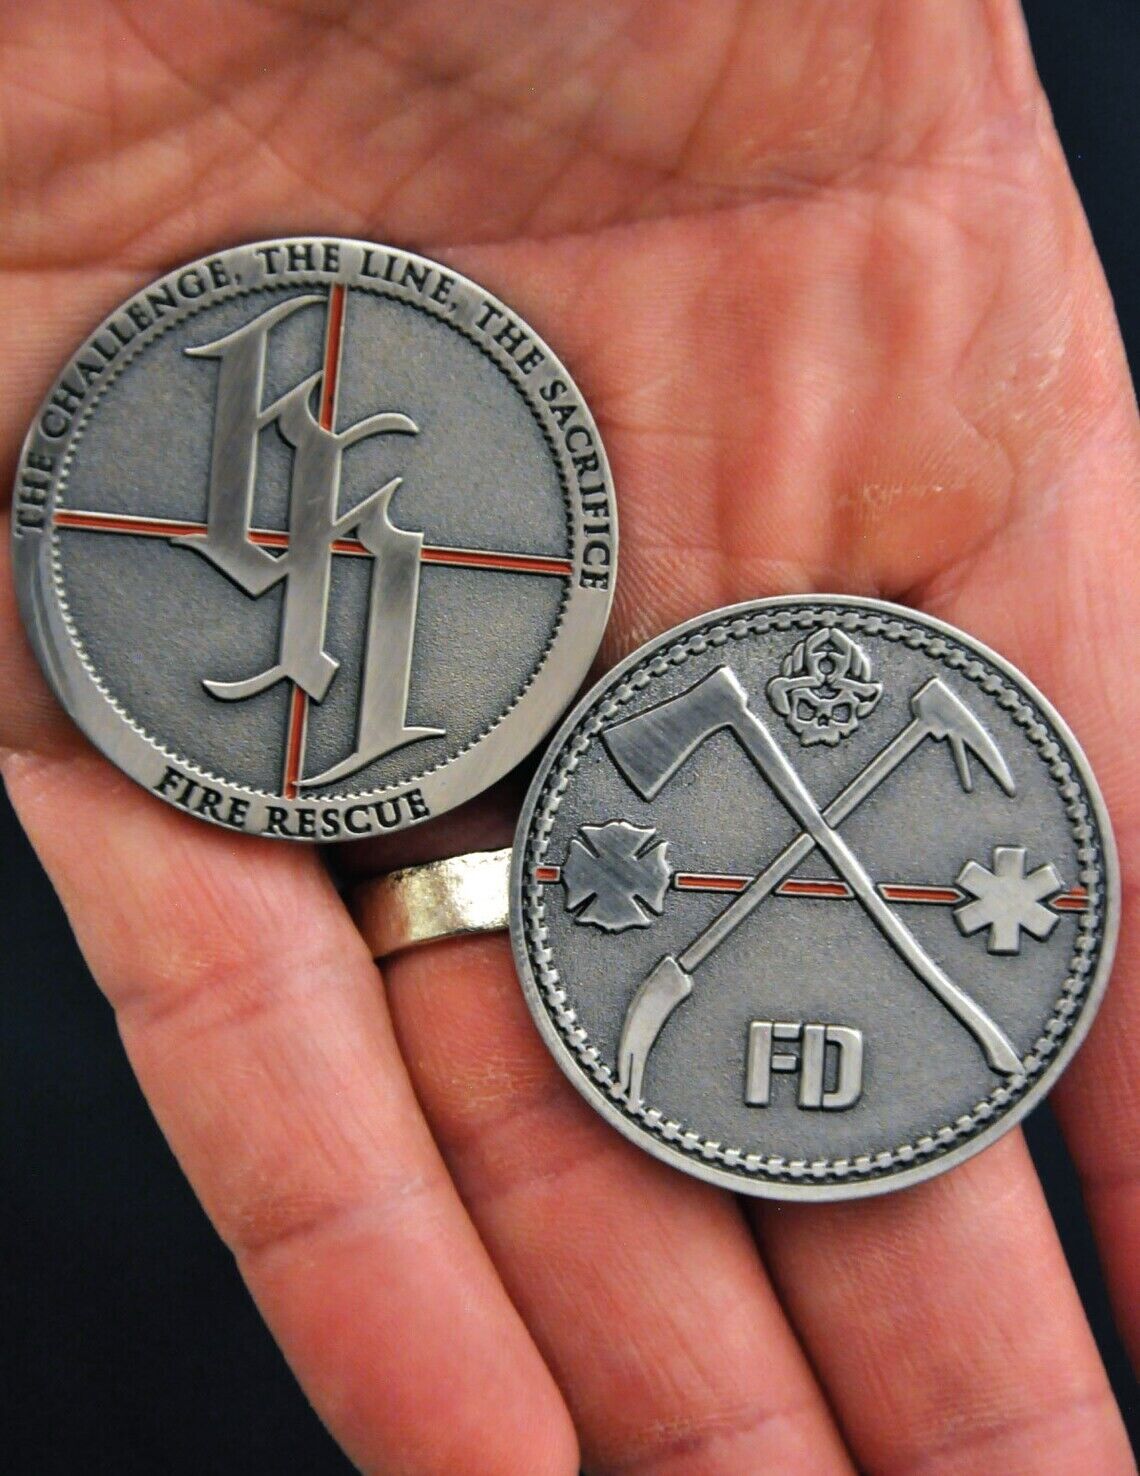 The Challenge. The Line. The Sacrifice. Thin Red Line Firefighter Challenge Coin